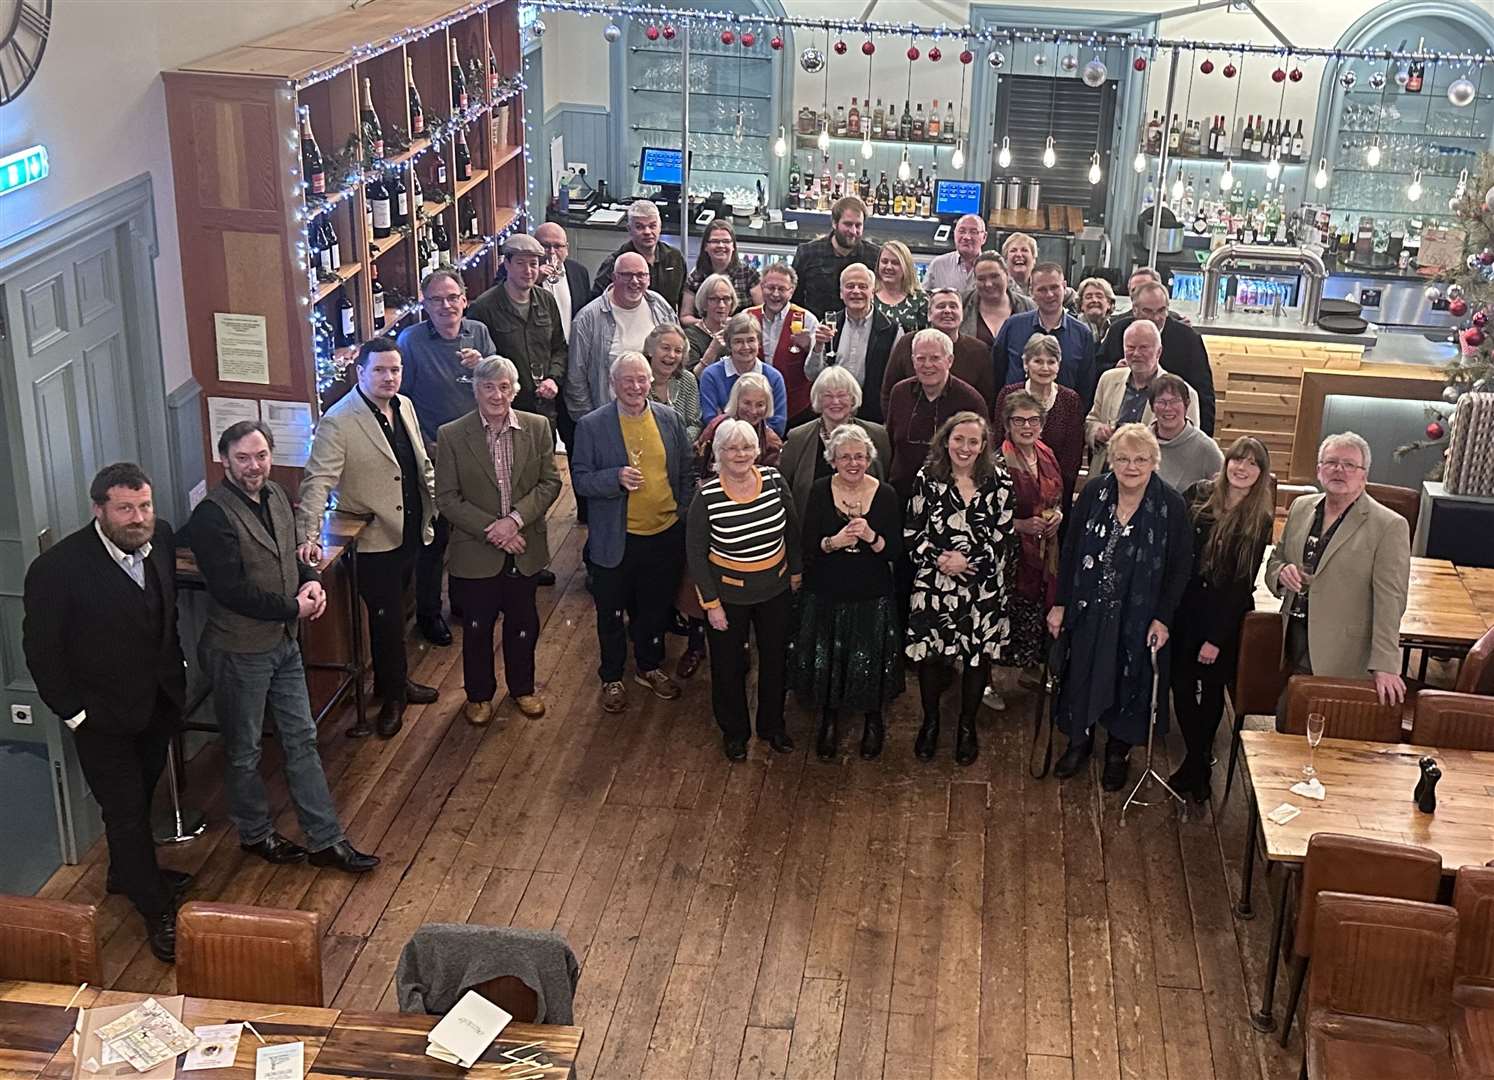 Colleagues, friends and members of the community gathered at Greens at the Courthouse, Dornoch, last Friday evening to show their appreciation for Joan Bishop’s unpaid service to the town over decades. Picture: Wayne Hurren